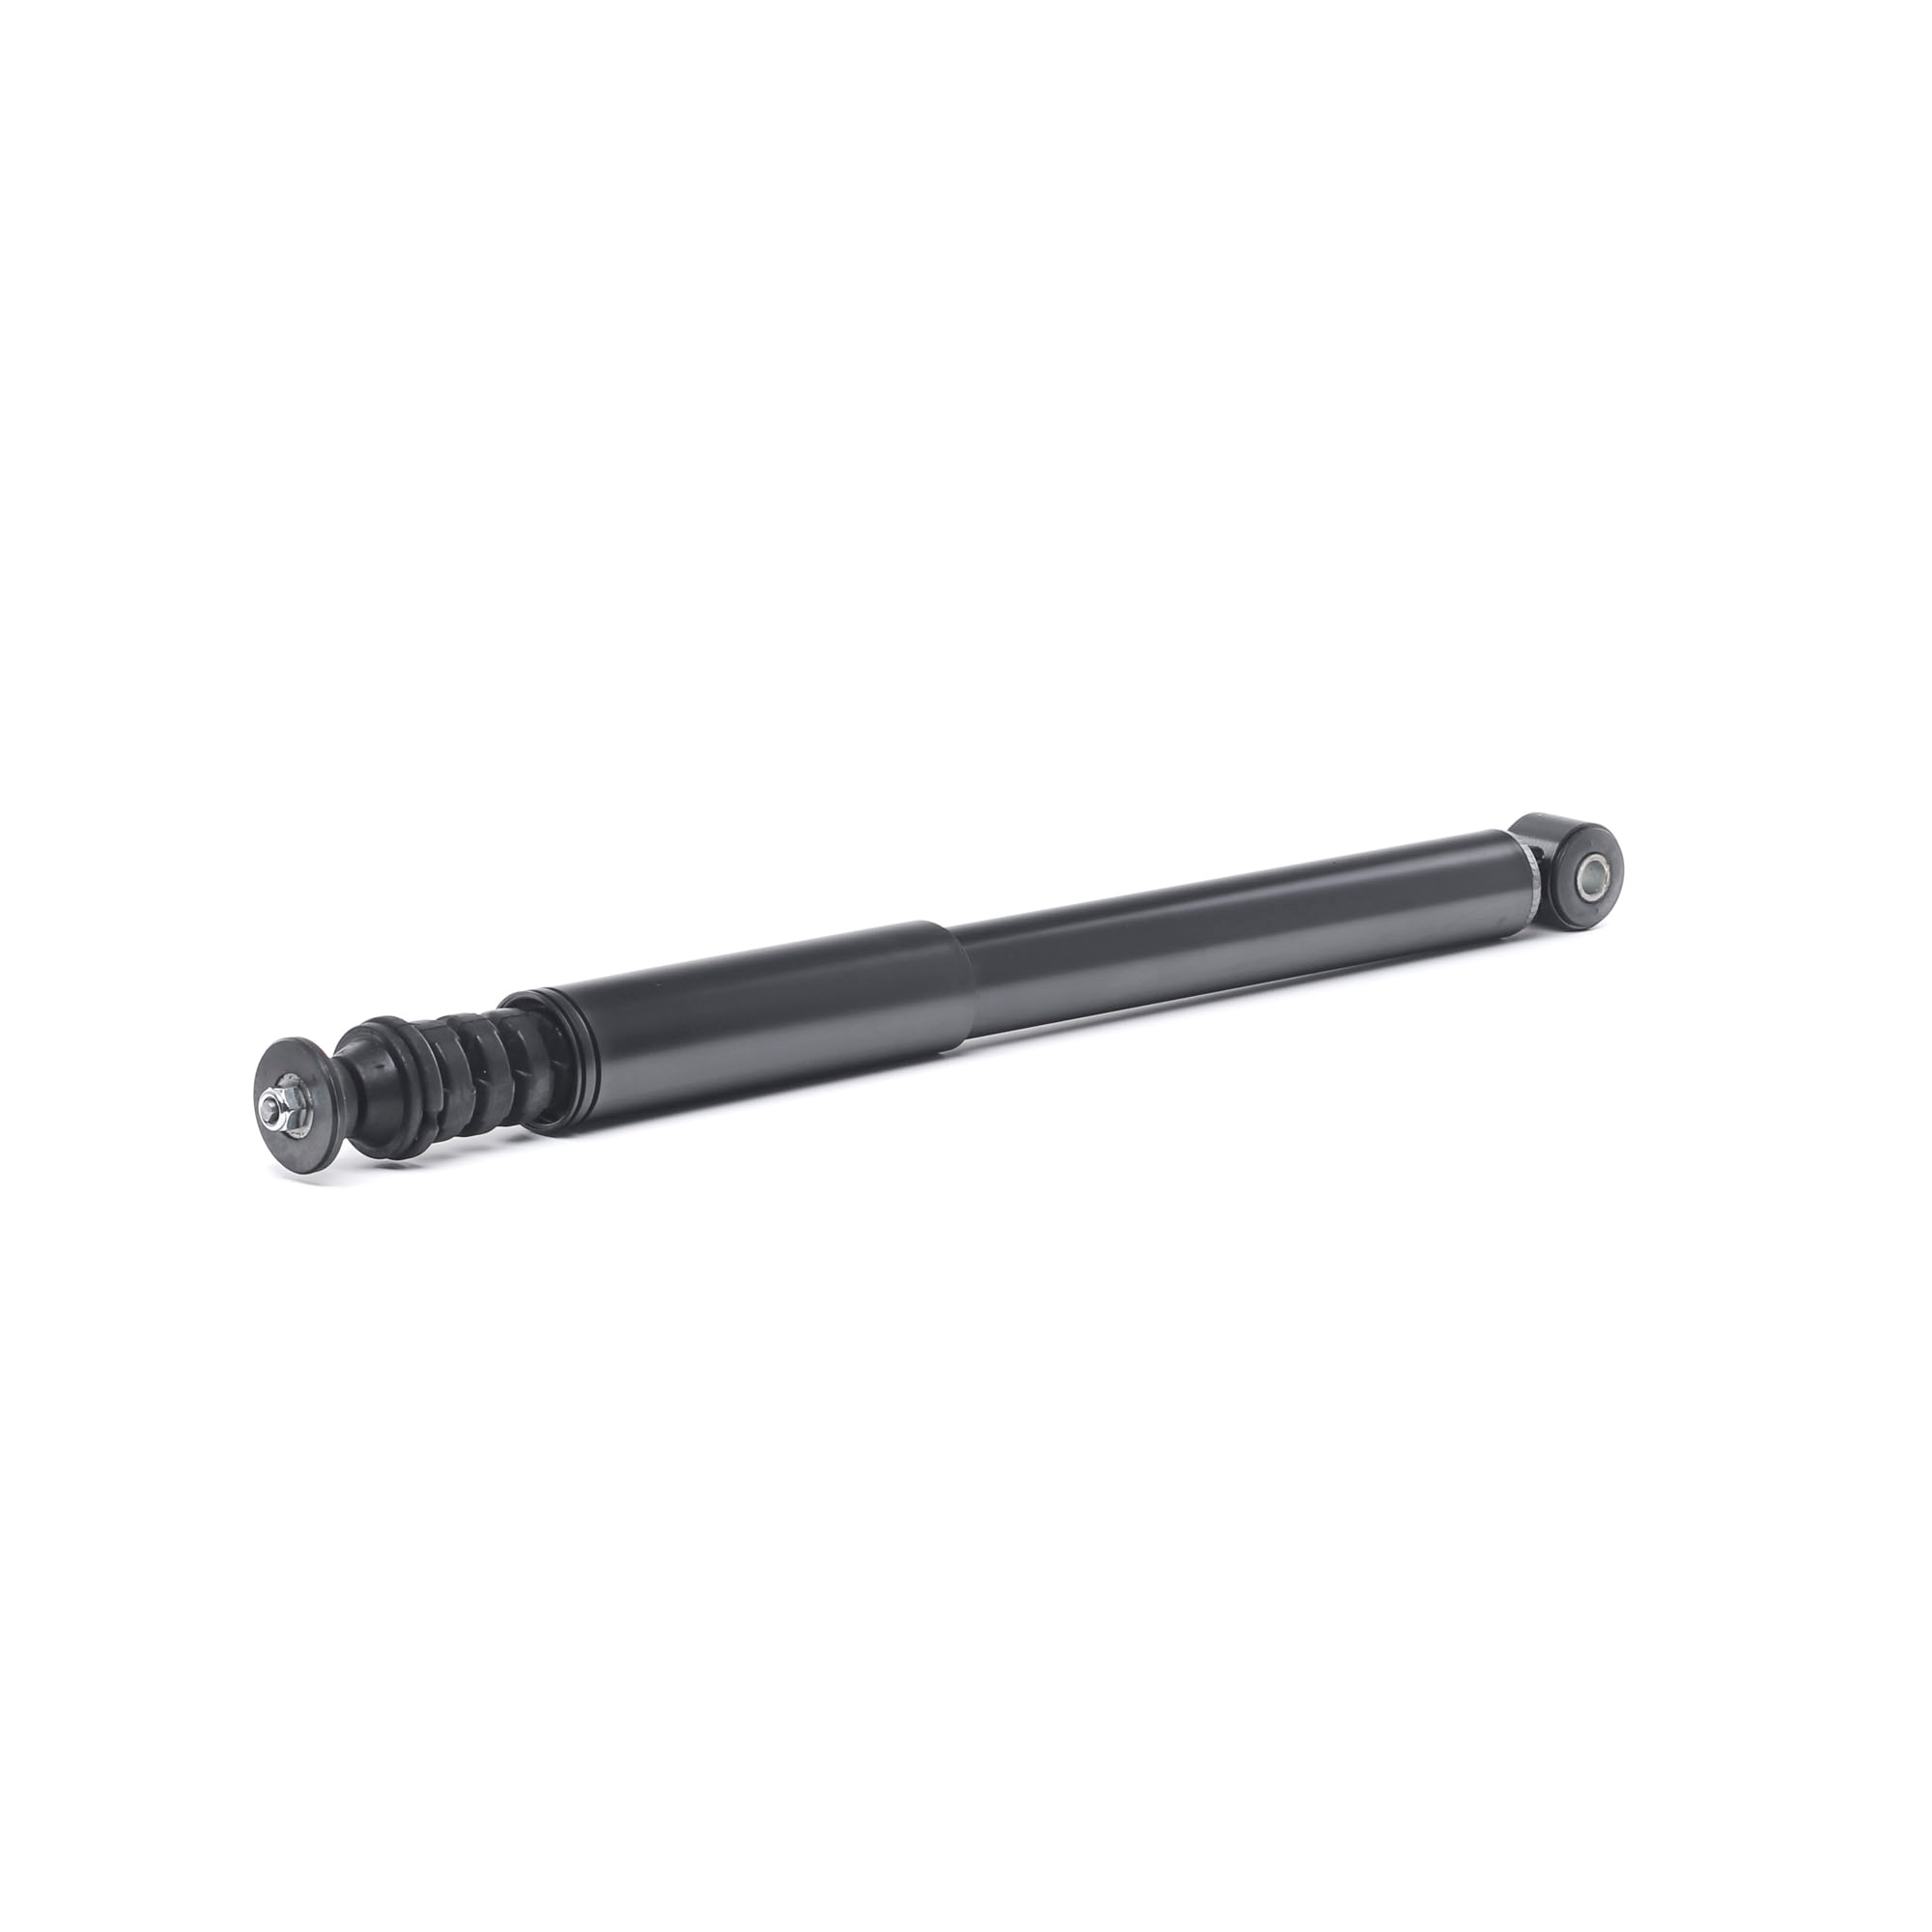 RIDEX 854S2402 Shock absorber Rear Axle, Gas Pressure, 608x403 mm, Twin-Tube, Absorber does not carry a spring, Bottom eye, Top pin